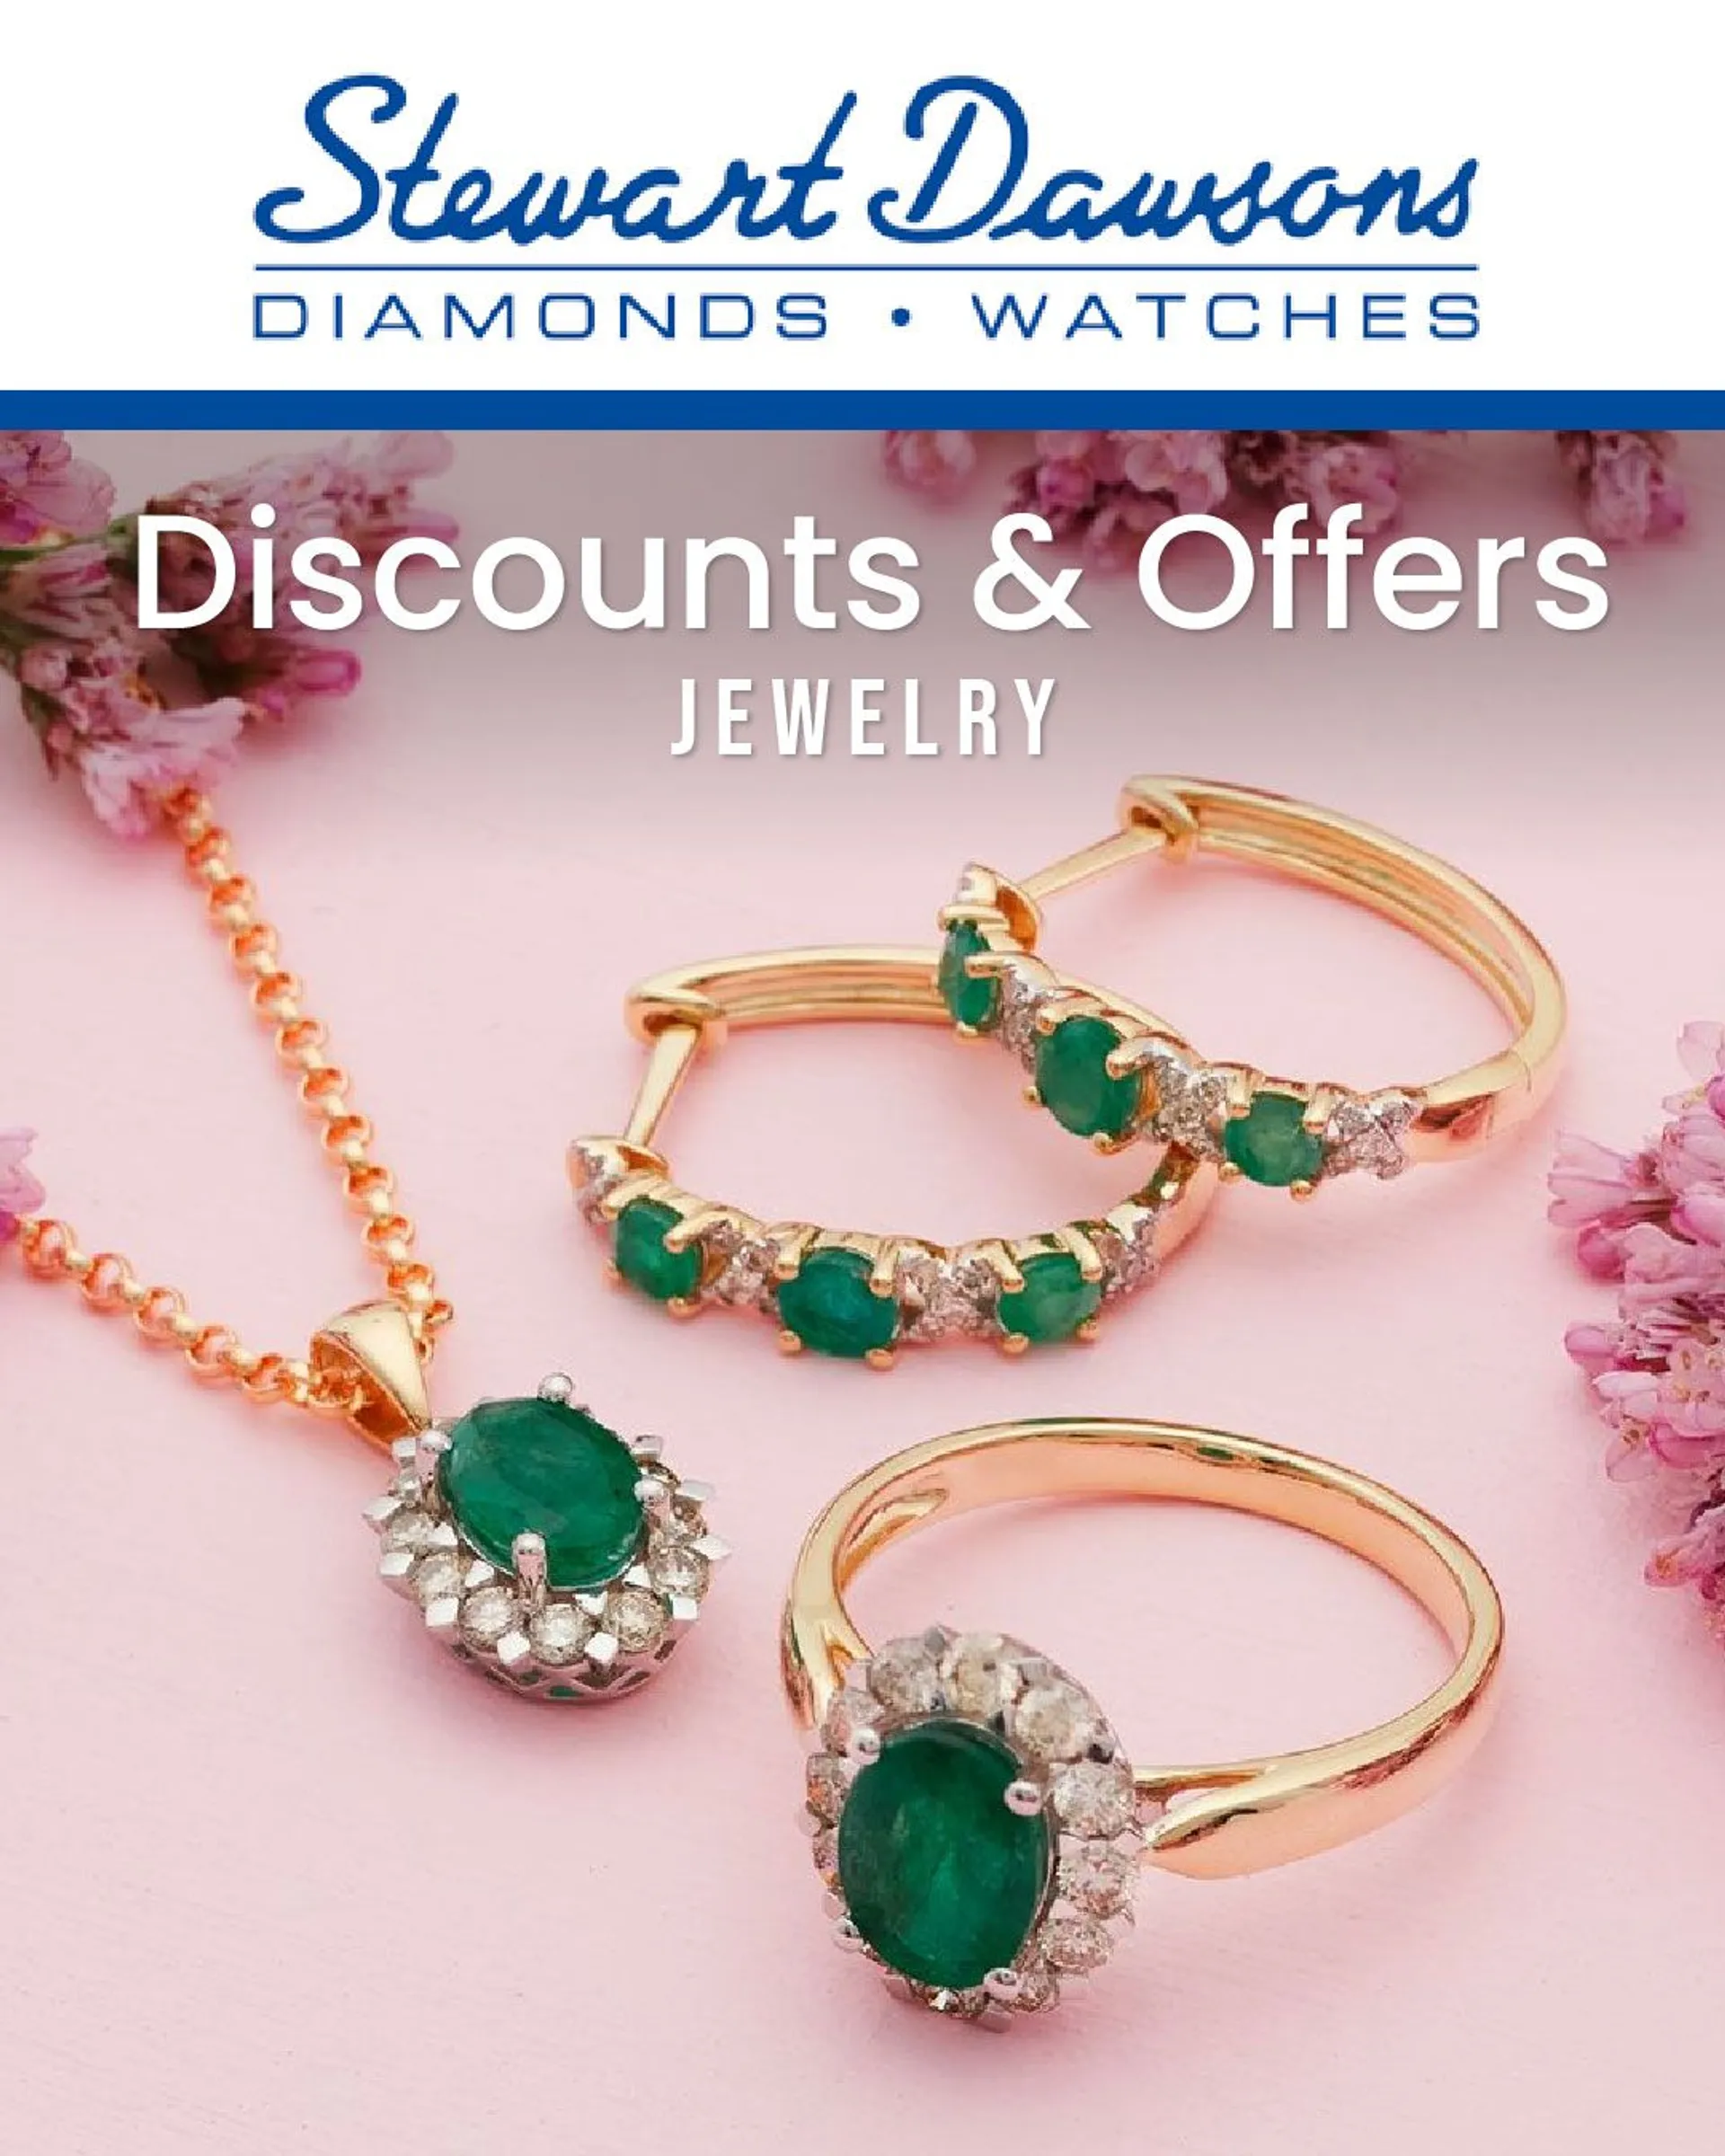 Stewart Dawsons - Jewellery and Watches - 28 March 2 April 2024 - Page 1